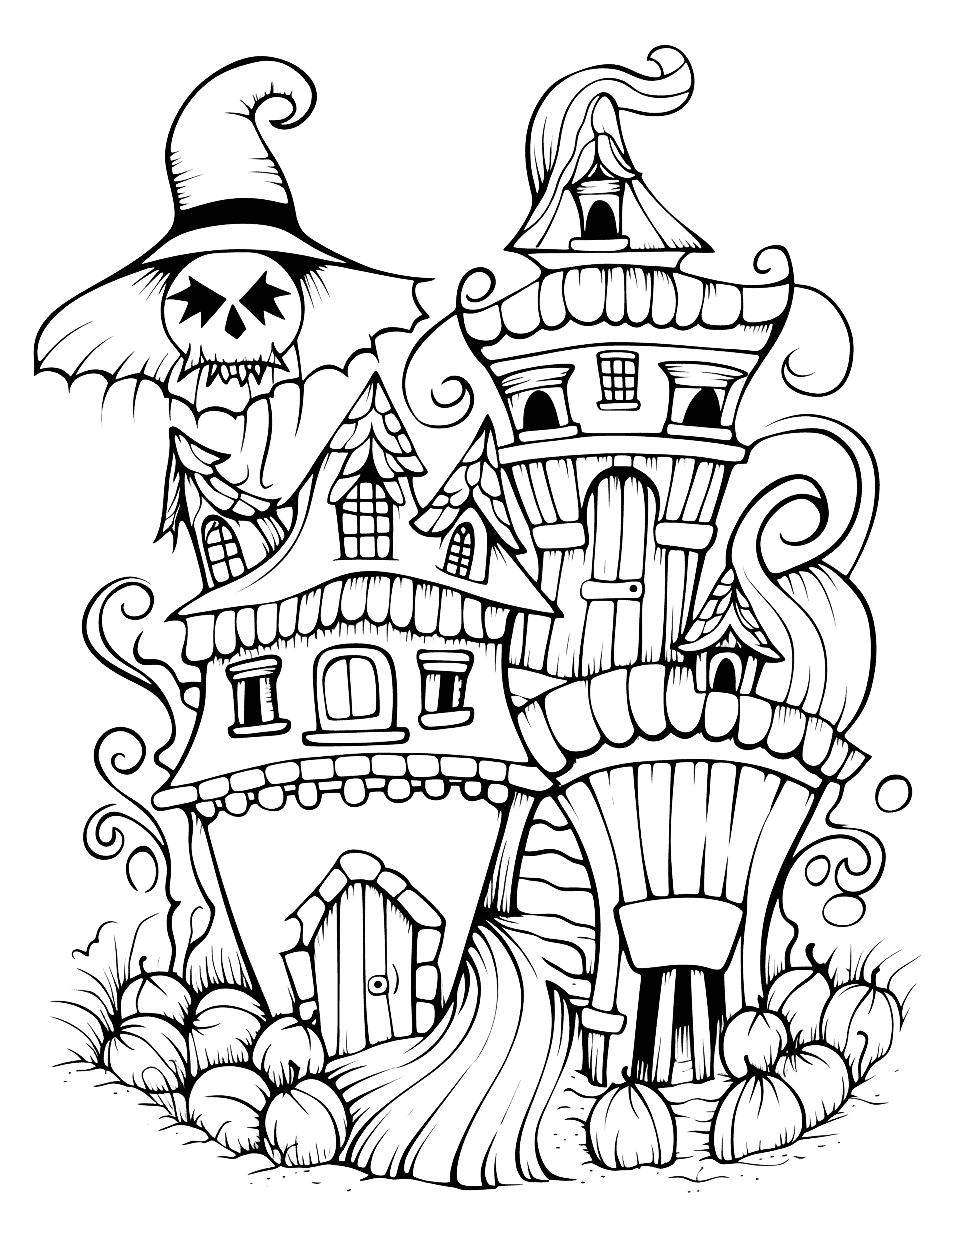 Nightmare Before Christmas Town Halloween Coloring Page - The iconic town from the beloved movie filled with details that will delight fans.